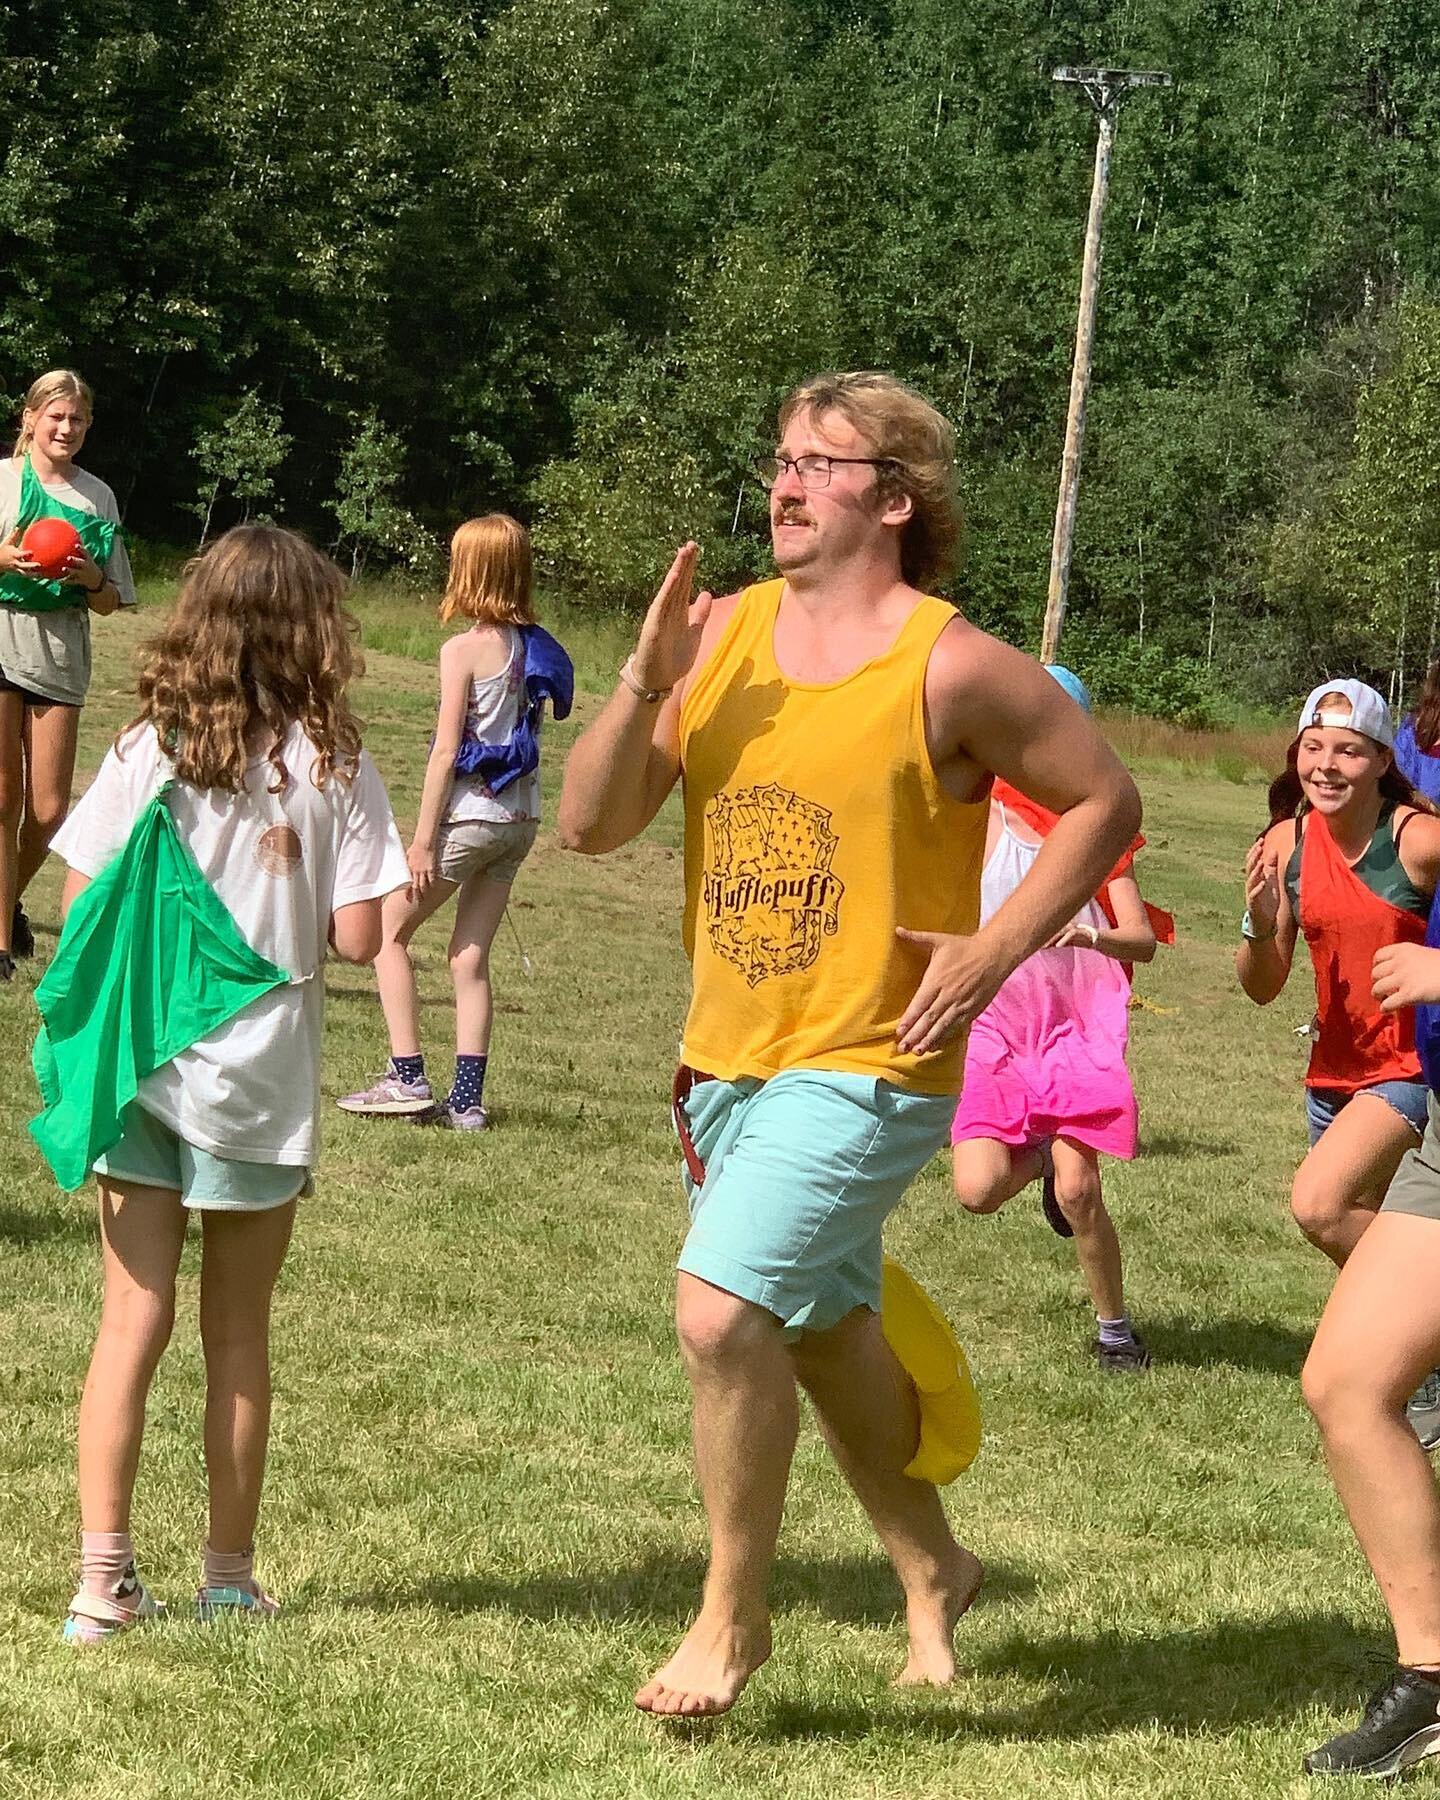 With only 72 days left until camp, we&rsquo;re back to counting down our top 17 favourite things about camp. For 16: it&rsquo;s always a good workout. Whether you&rsquo;re going all out in every single game or just trying not to be late for the bell,